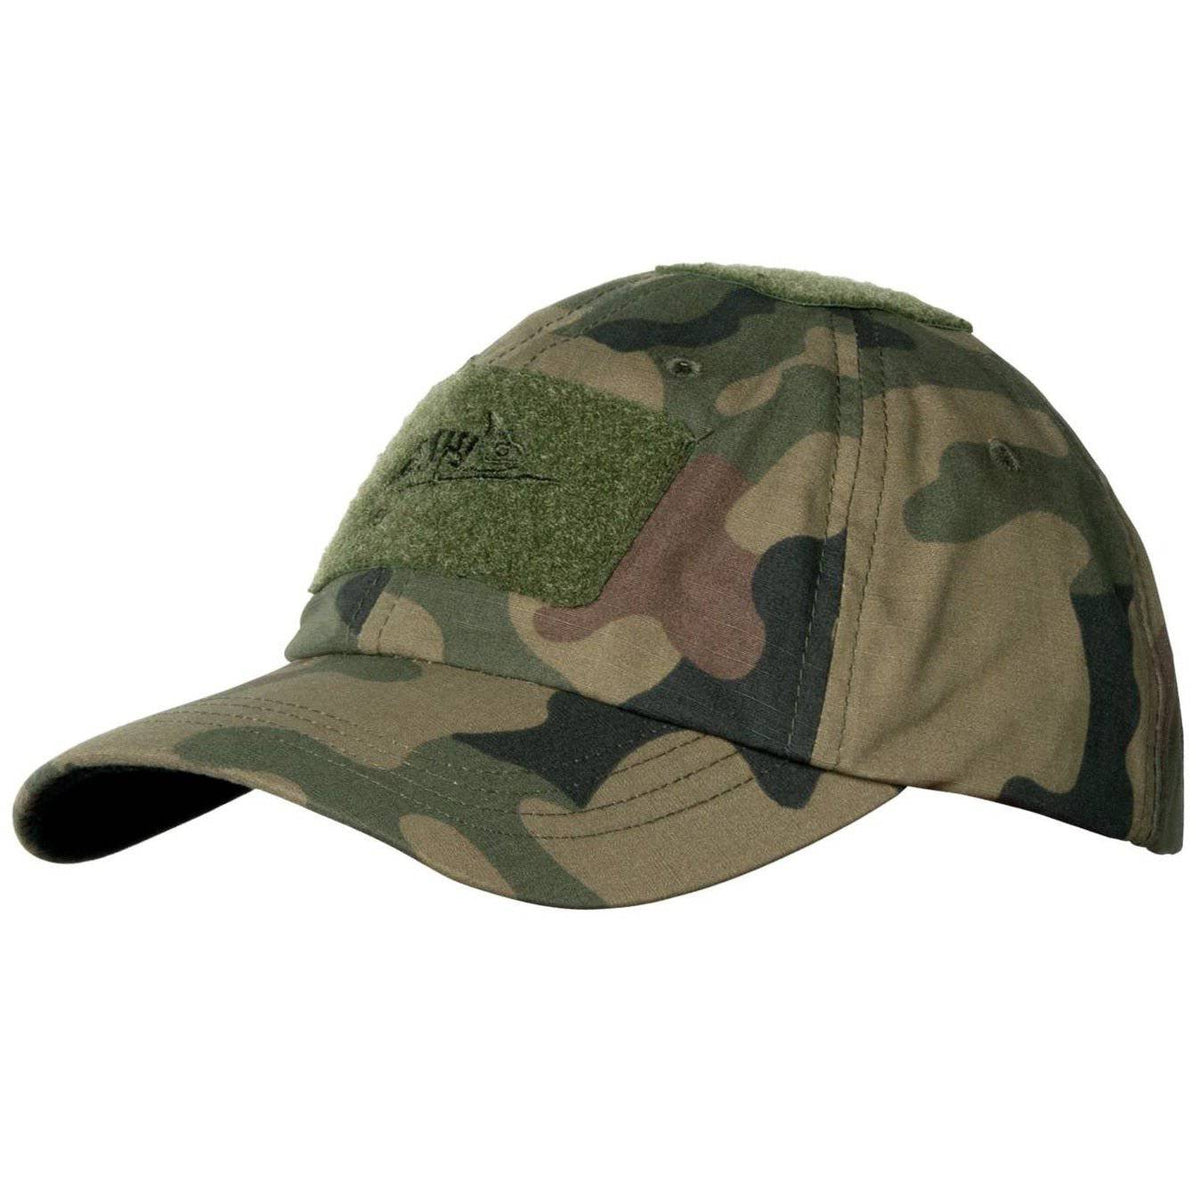 HELIKON-TEX POLYCOTTON RIPSTOP BASEBALL CAP - The Morale Patches